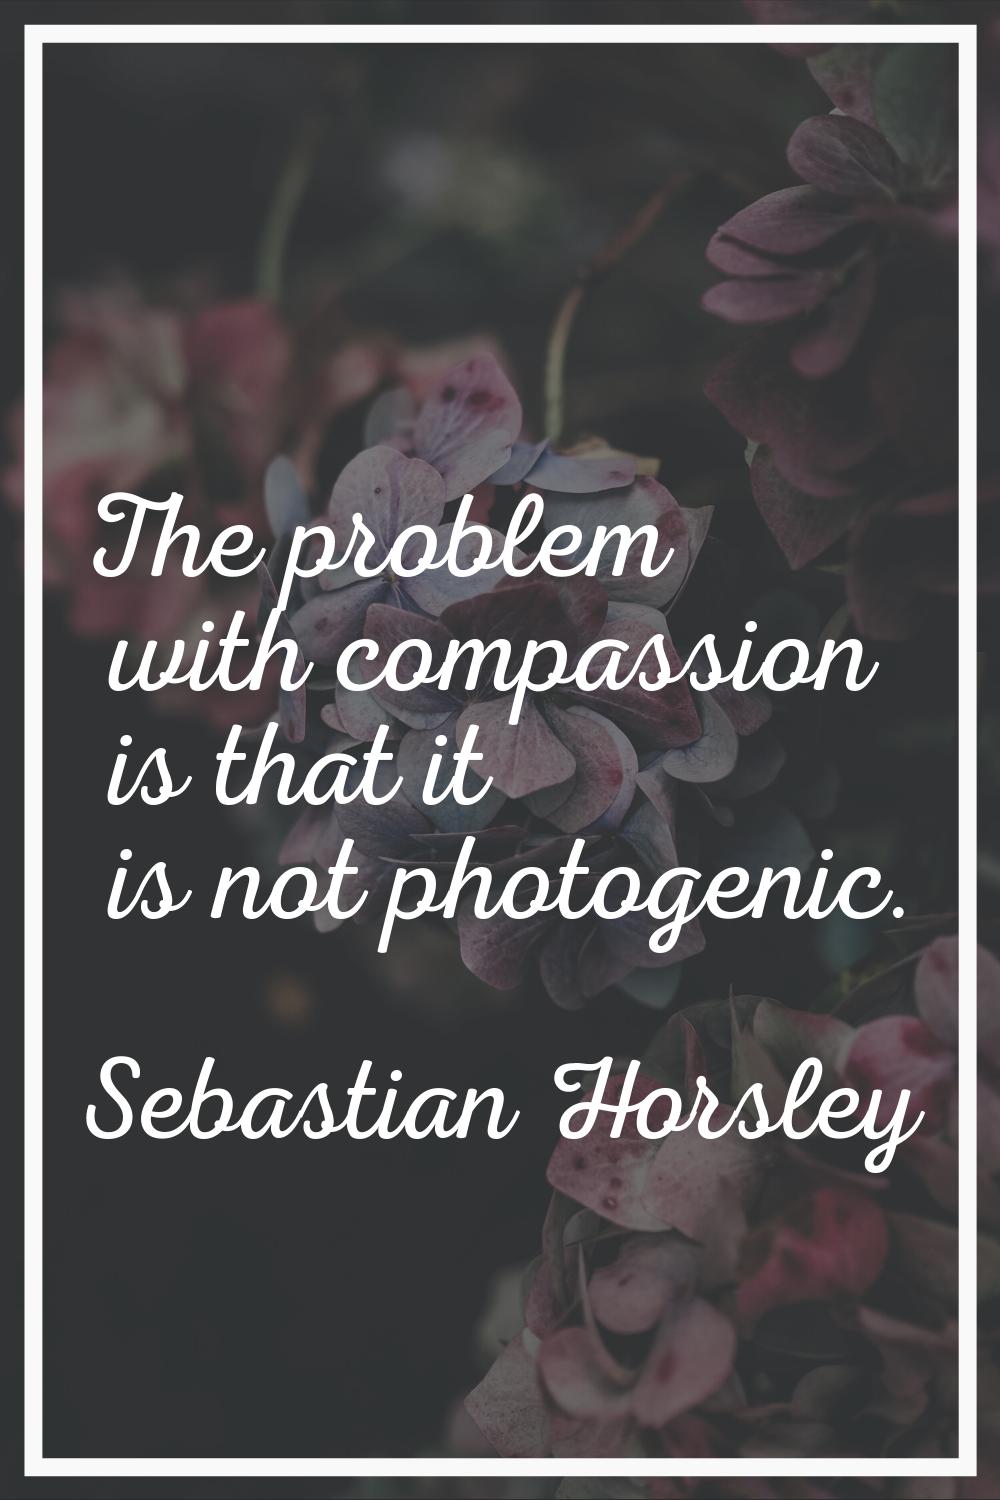 The problem with compassion is that it is not photogenic.